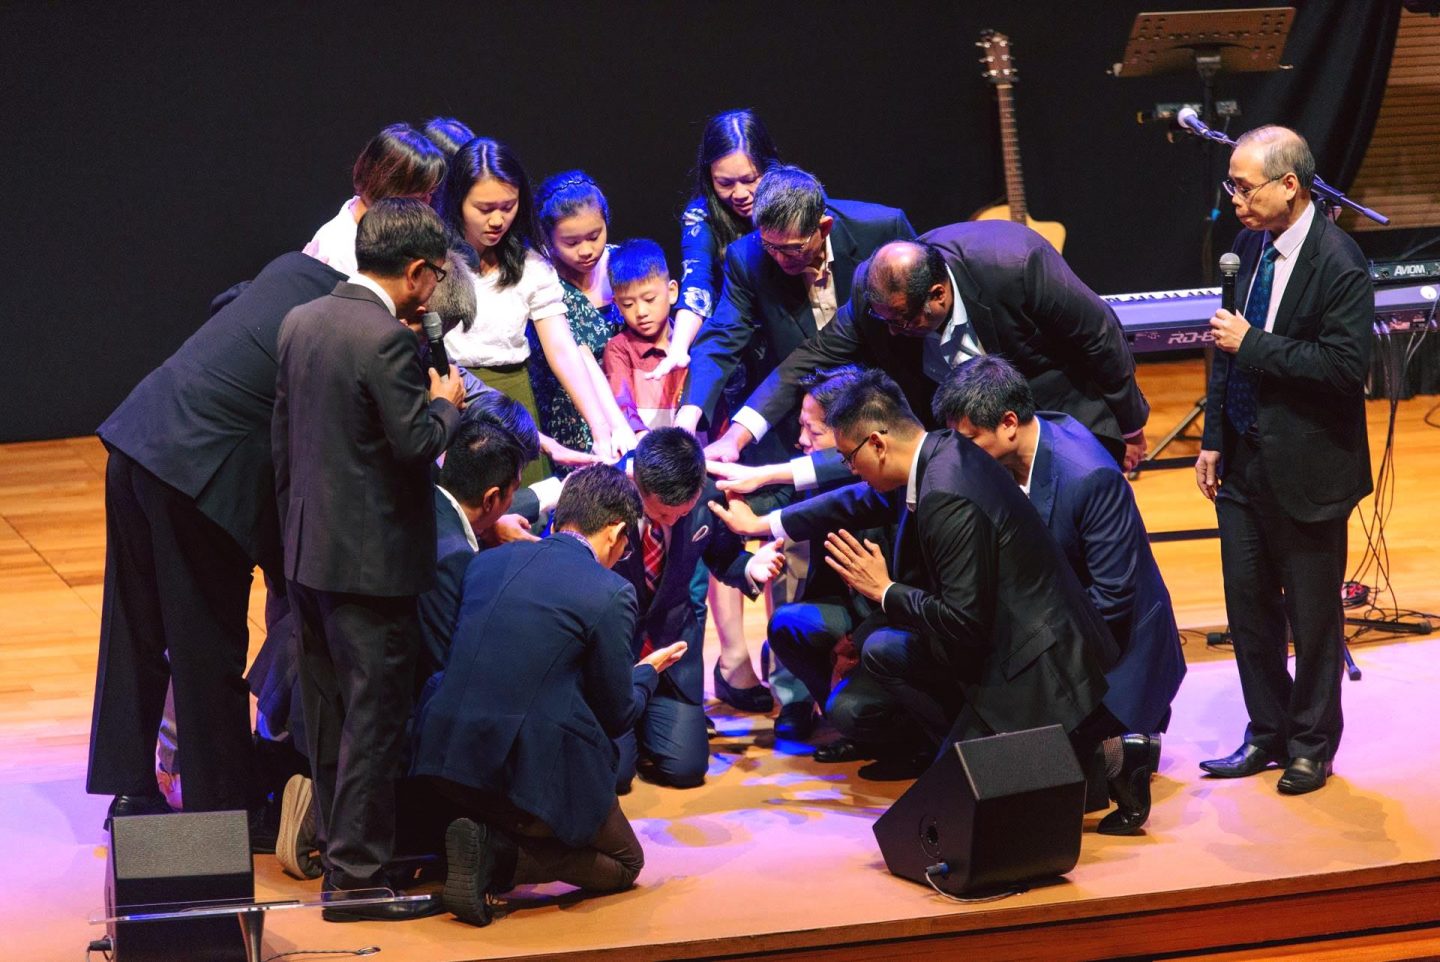 Church leadership praying over Rev Wilson Teo during his installation as Senior Pastor on January 1, 2020. Previously the Executive Pastor, Rev Wilson took over the mantle from Rev Calvin Lee. Photo from Grace Assembly Of God Facebook.